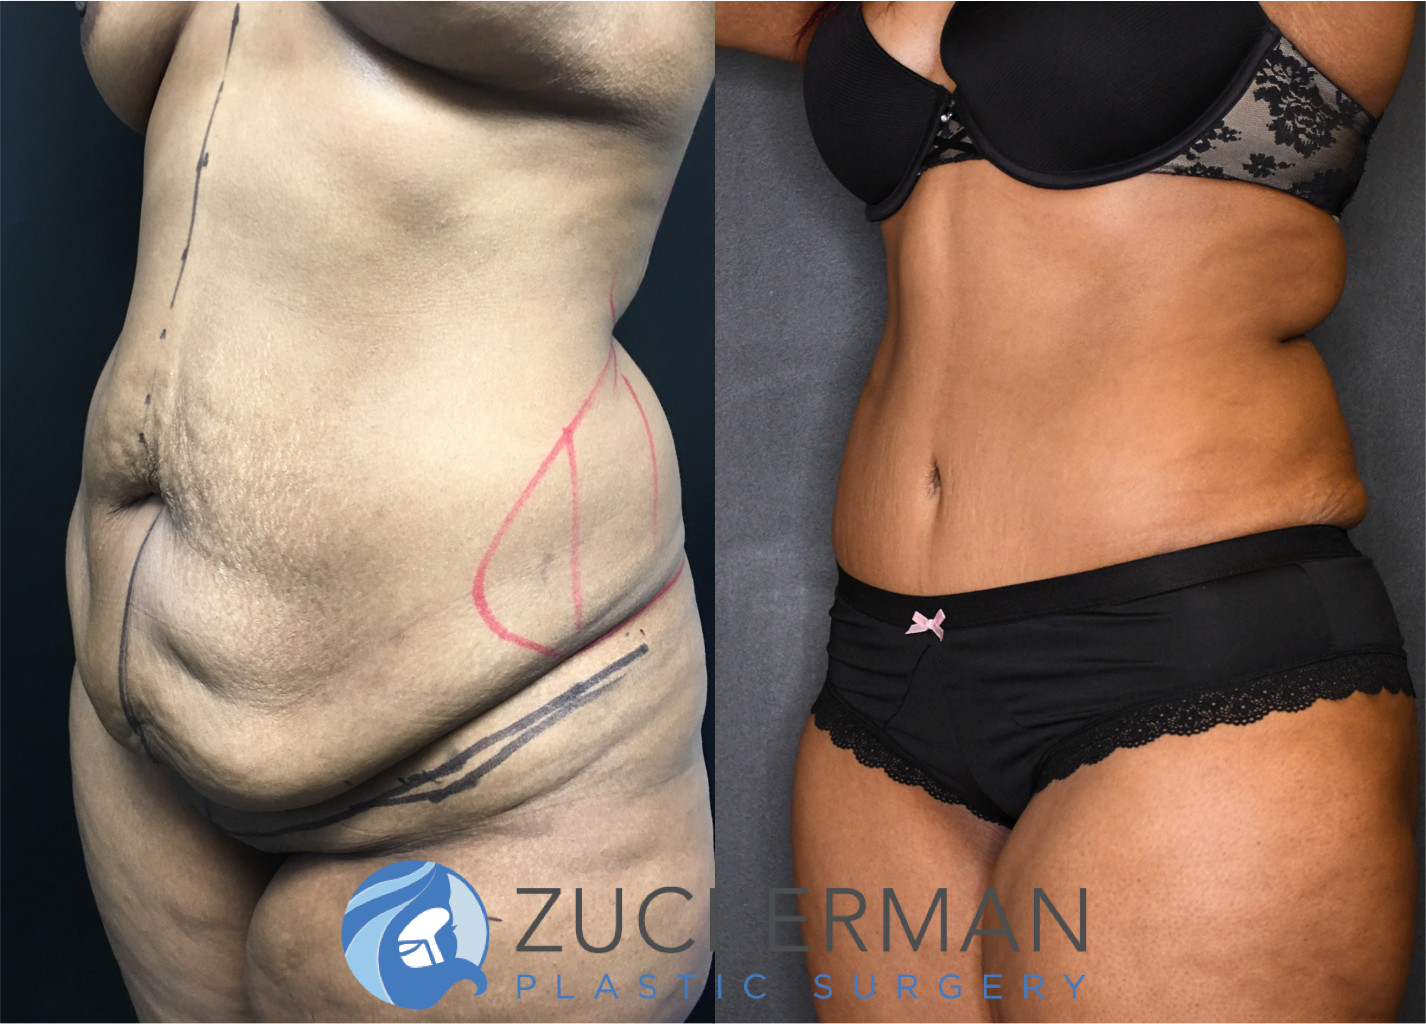 Dr. Zuckerman's Techniques to Achieve the Best Tummy Tuck Surgery